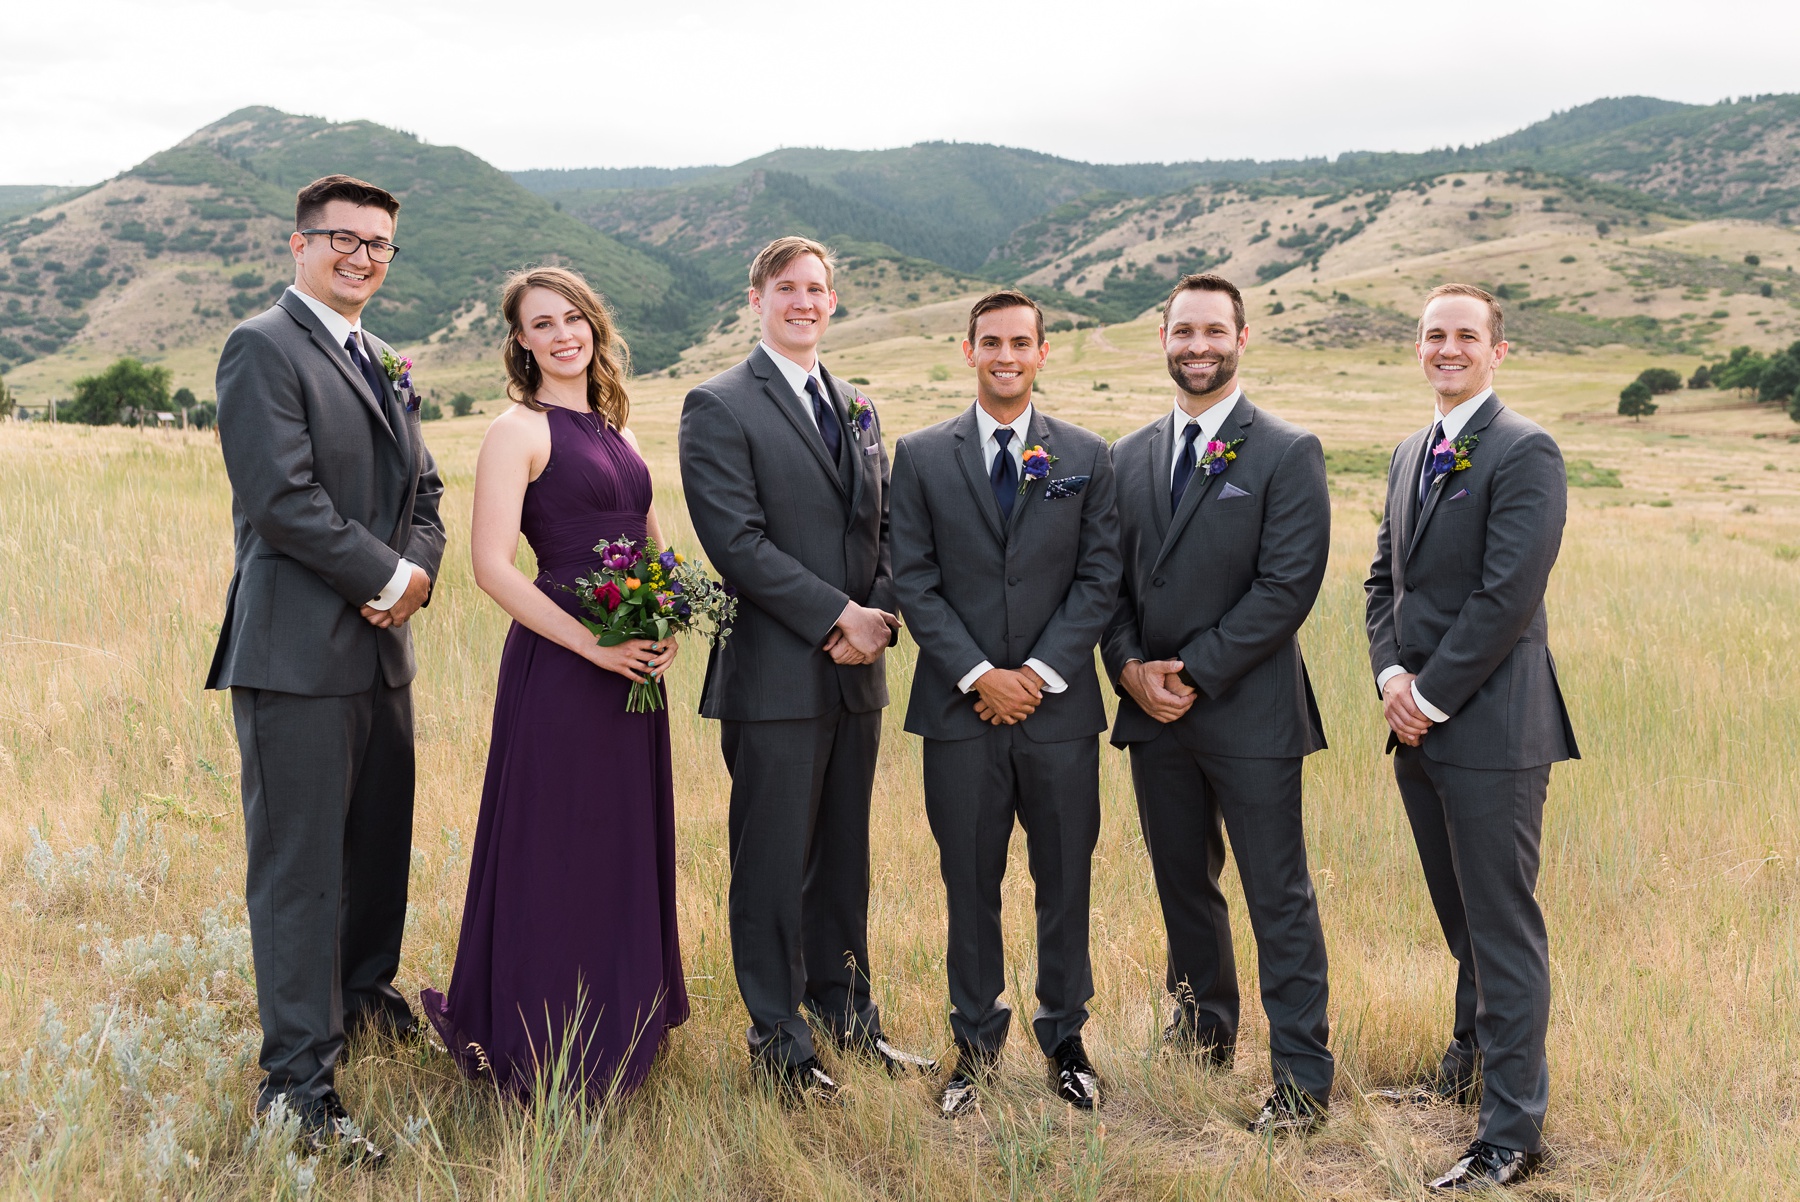 Groomsmen Photos at The Manor House